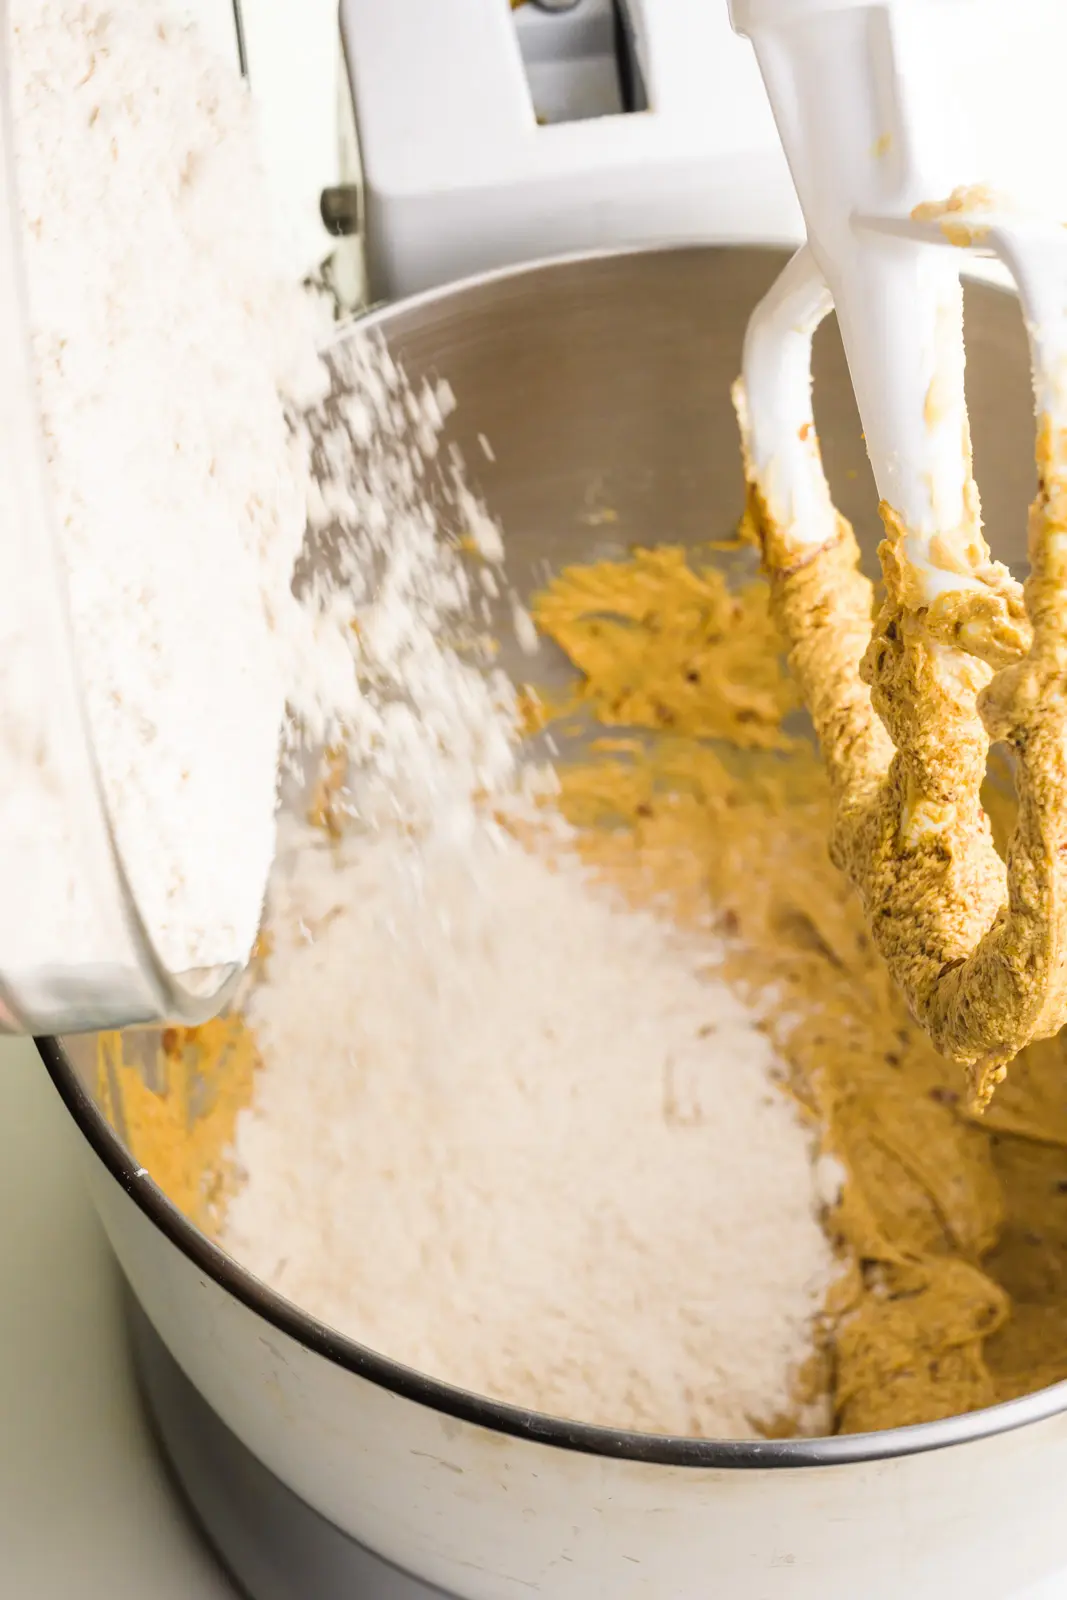 Flour is poured into a mixing bowl with cookie dough.